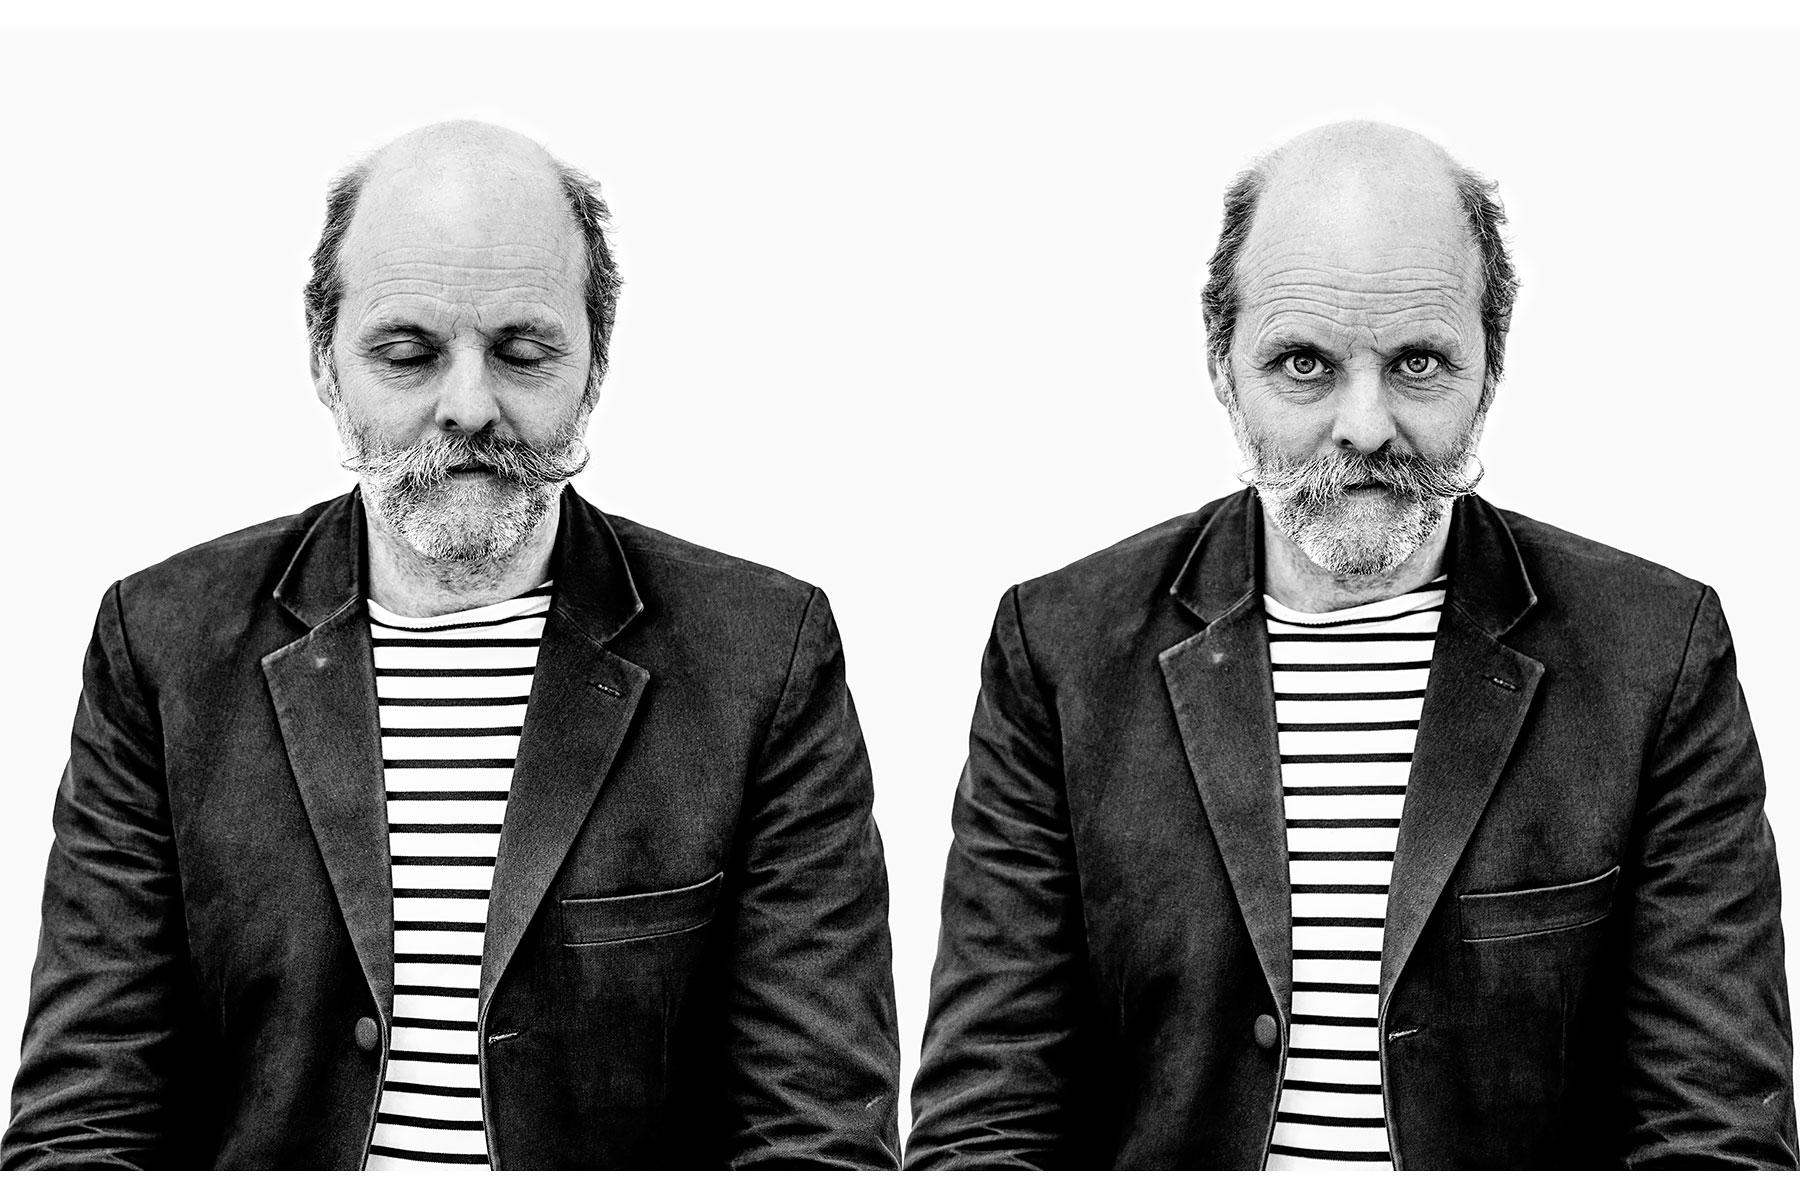 A double portrait of the British artist Gavin Turk with his eyes closed and open